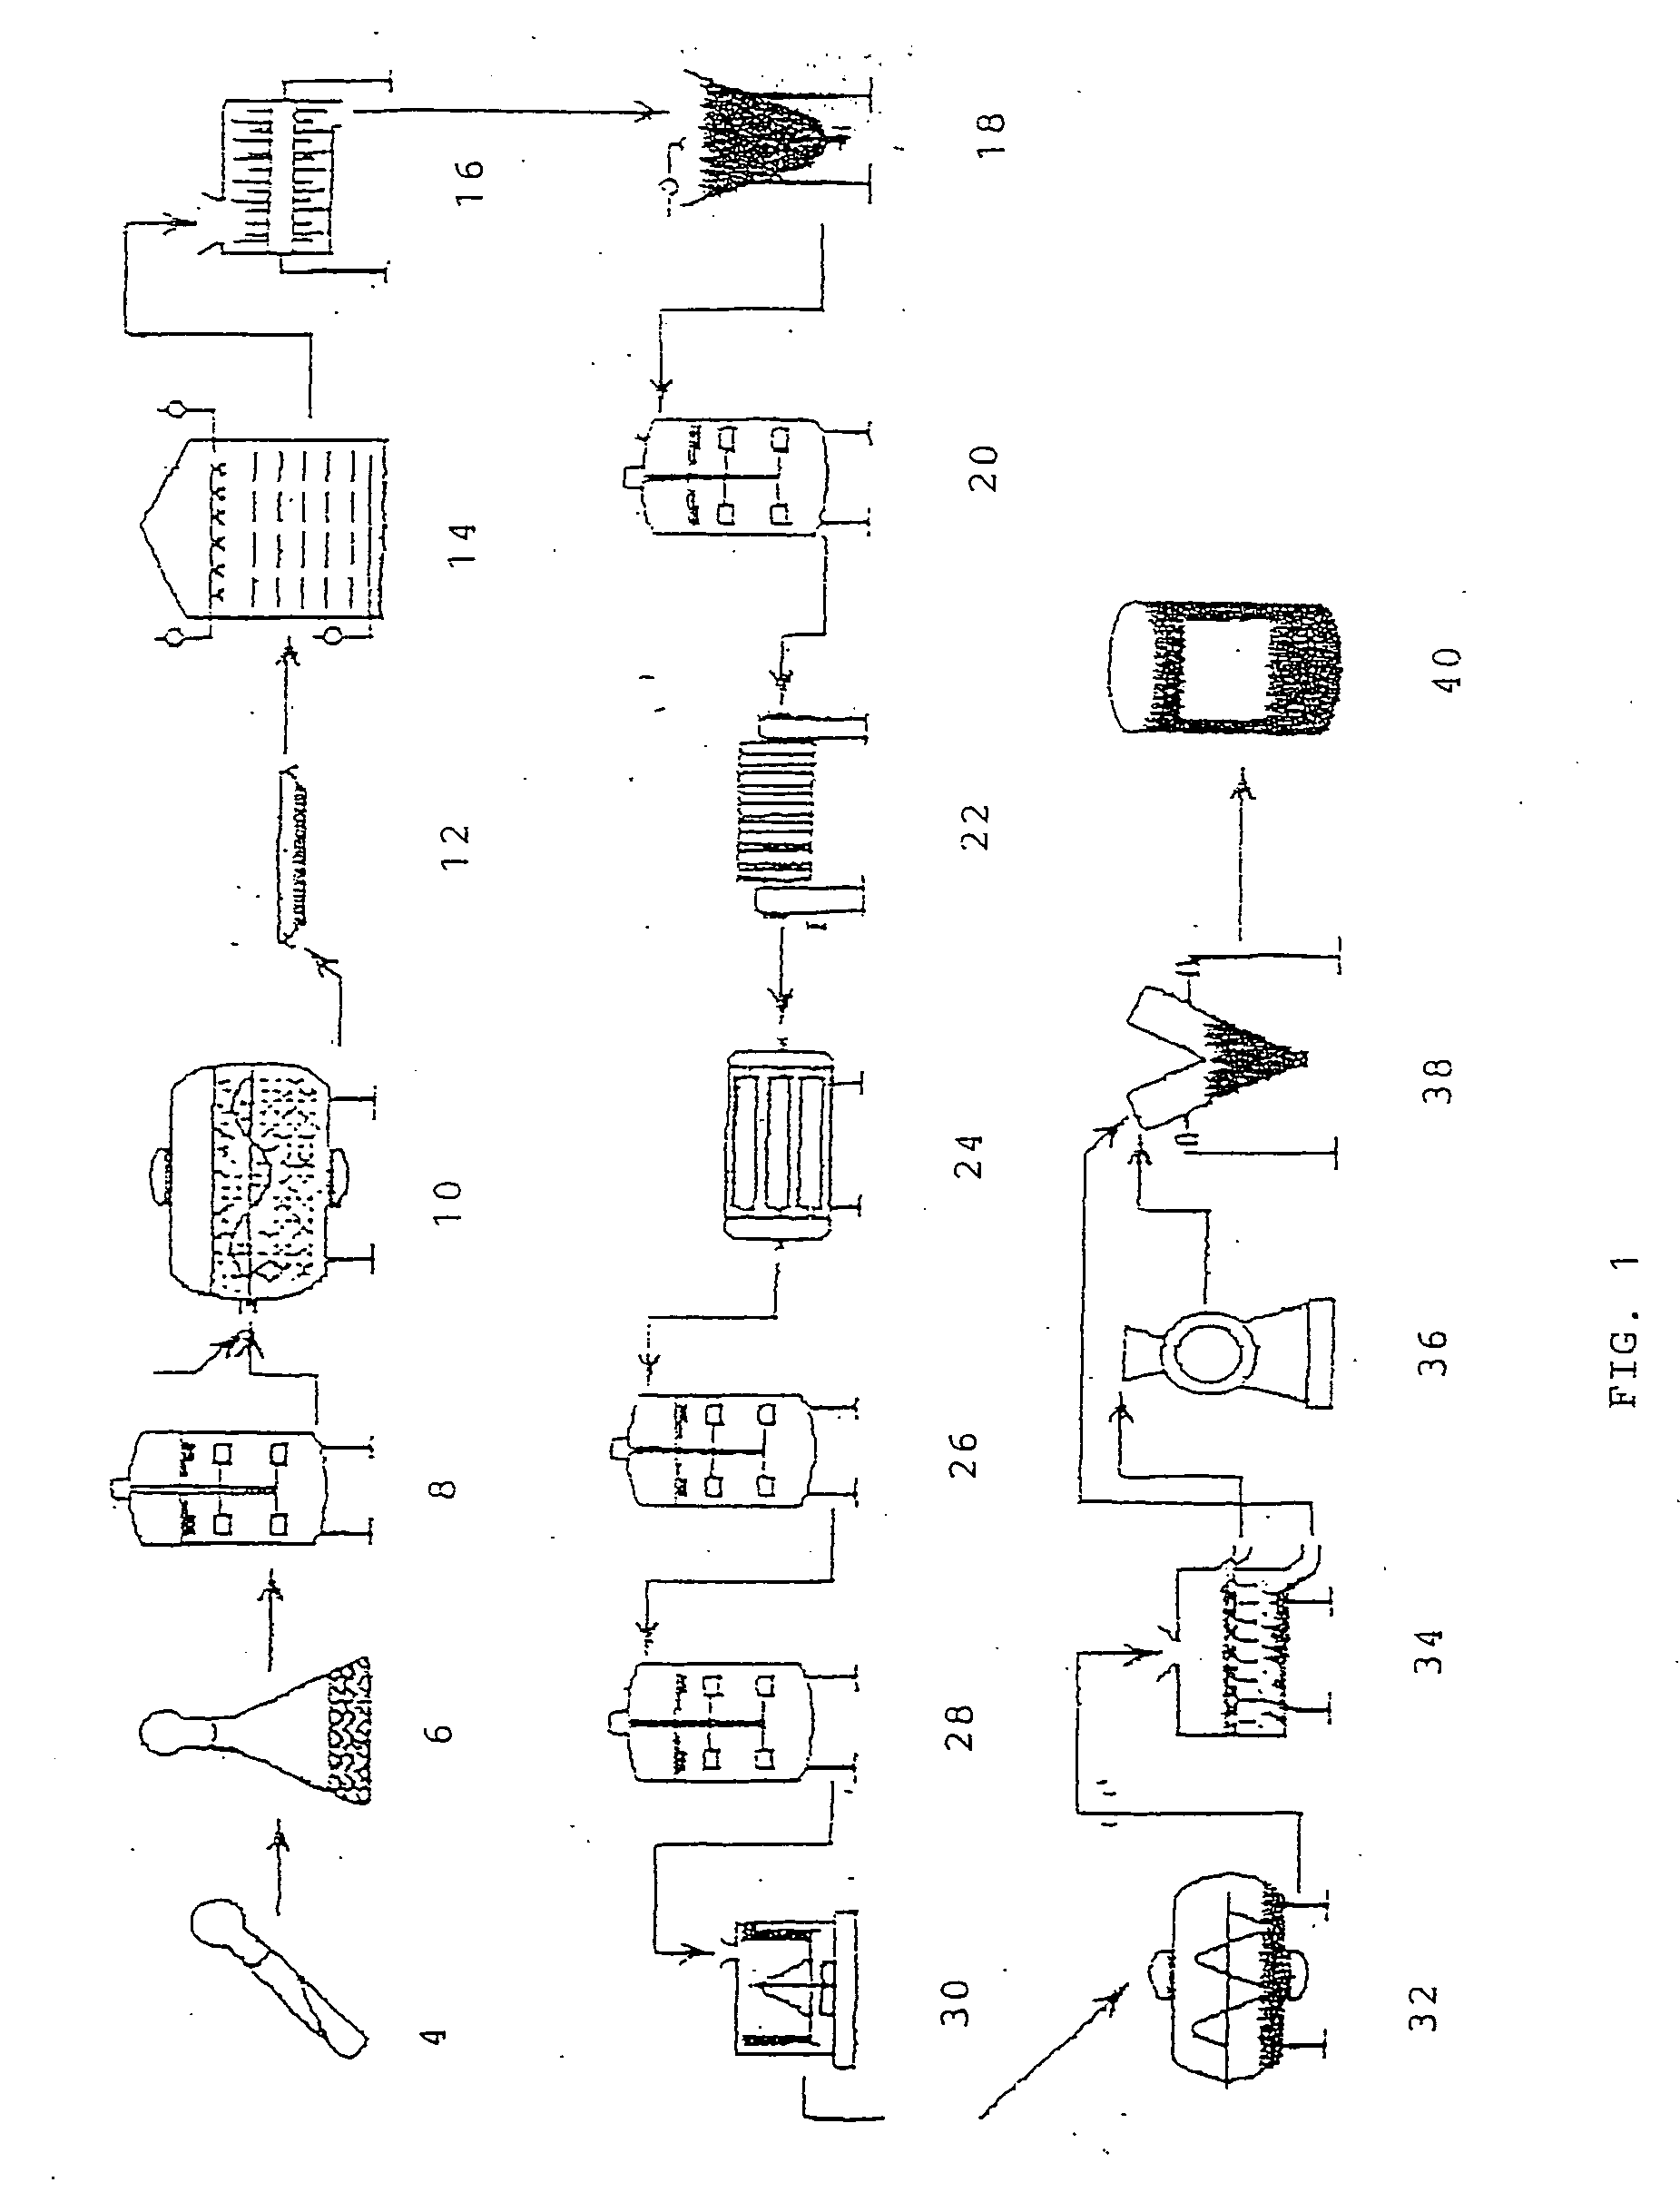 Compositions and methods relating to reduction of symptoms of autism